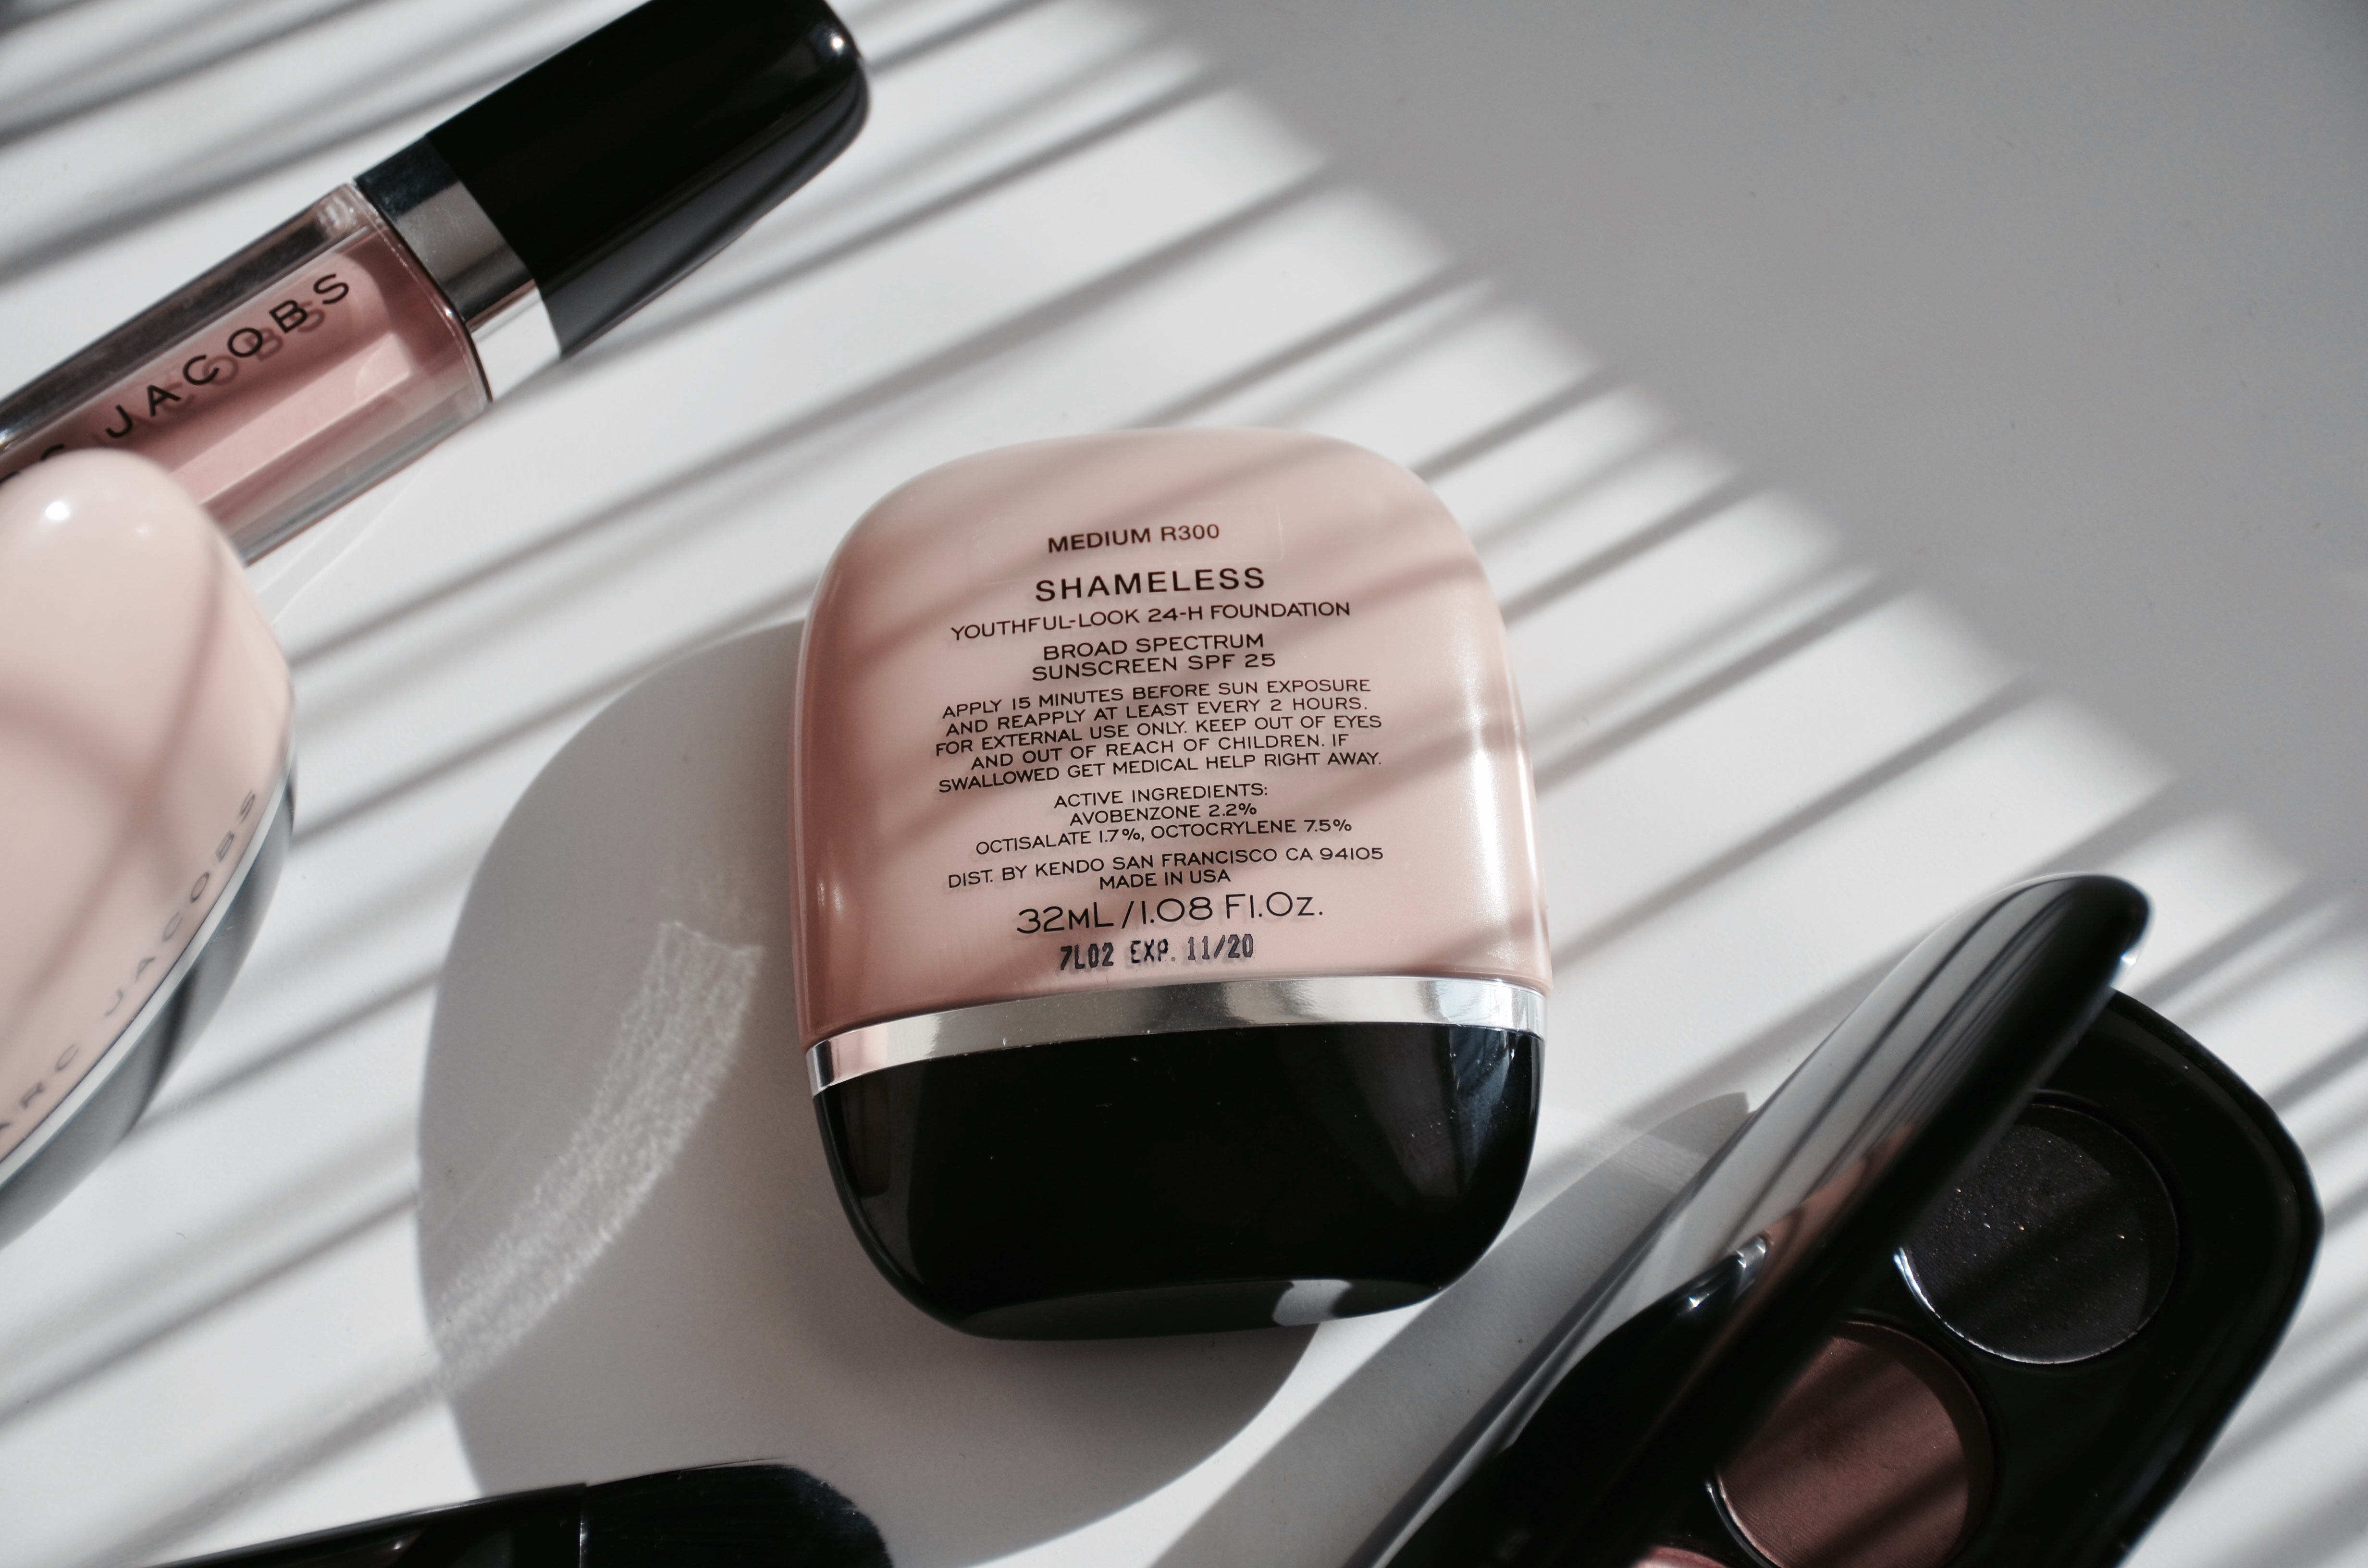 Marc Jacobs Shameless Youthful Look 24h Foundation